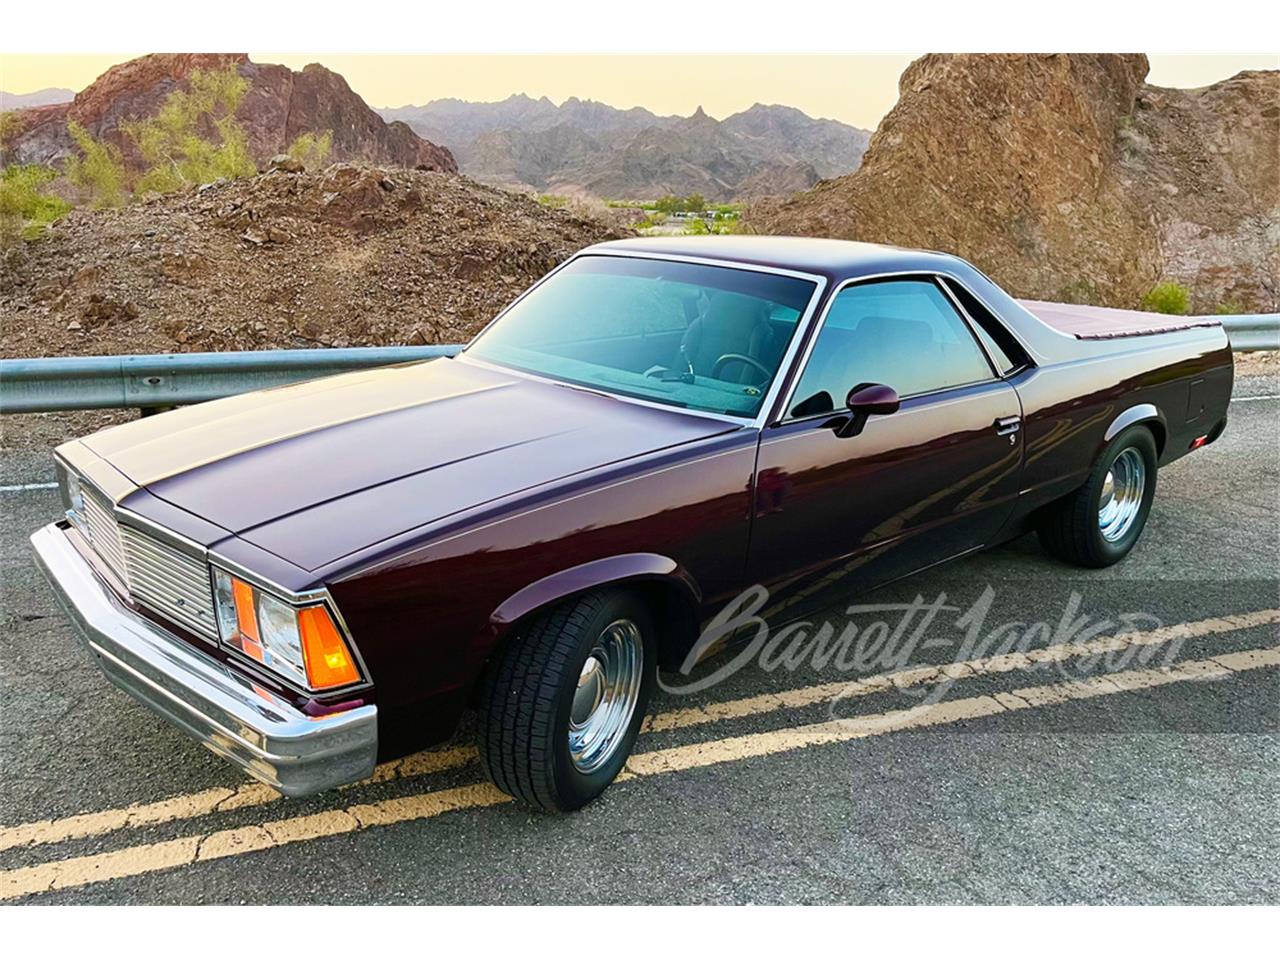 For Sale at Auction: 1980 Chevrolet El Camino in Las Vegas, Nevada for sale in Las Vegas, NV